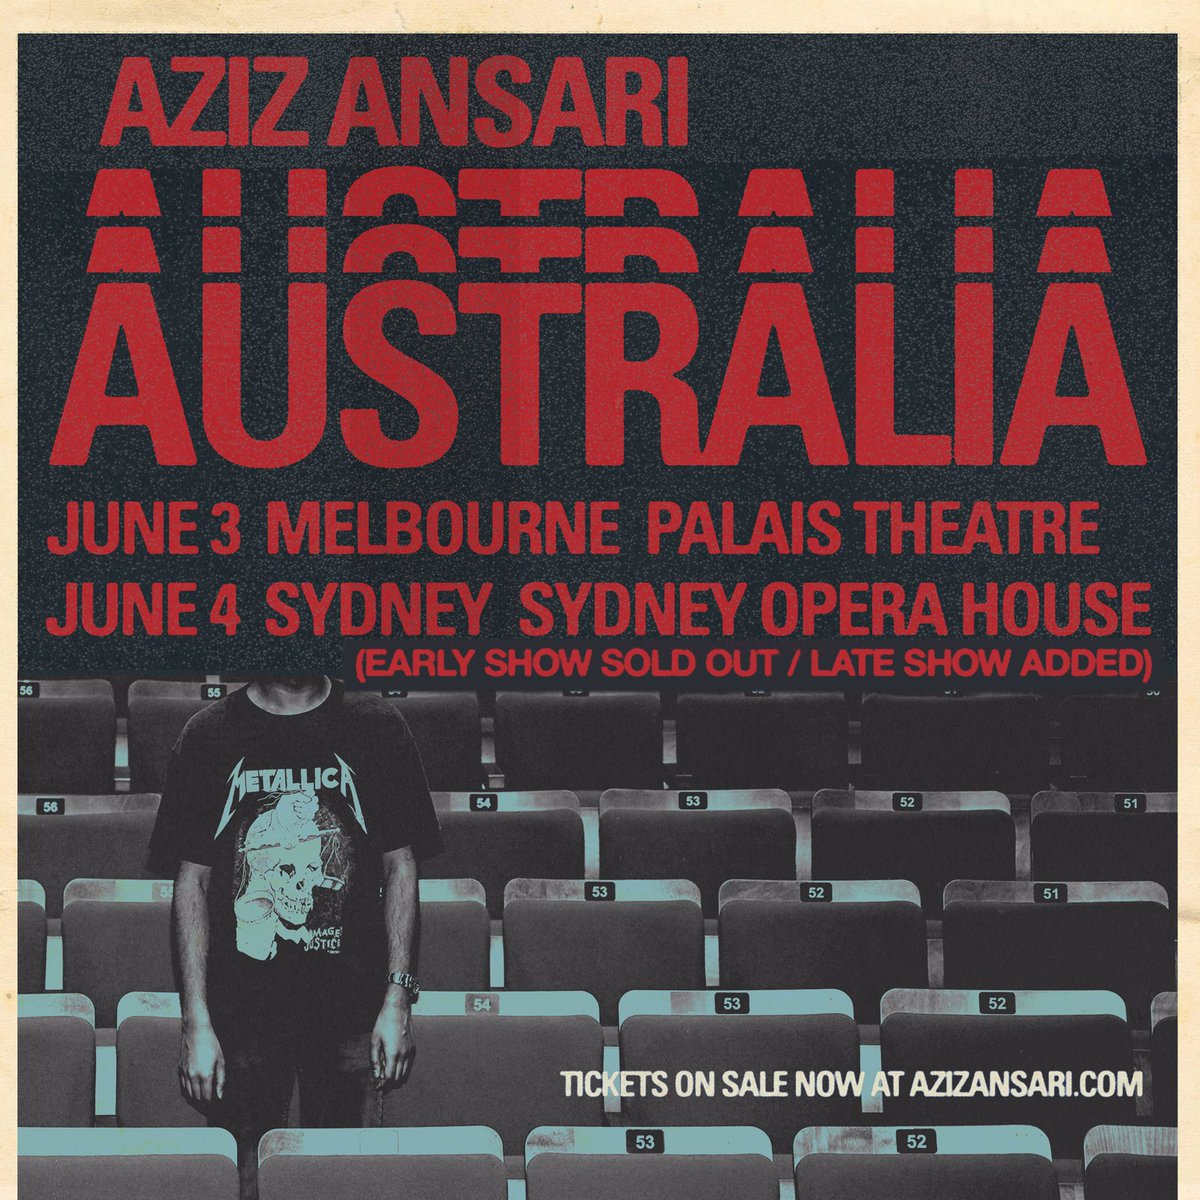 SYDNEY: First show sold out. Second show added. Get tix at  